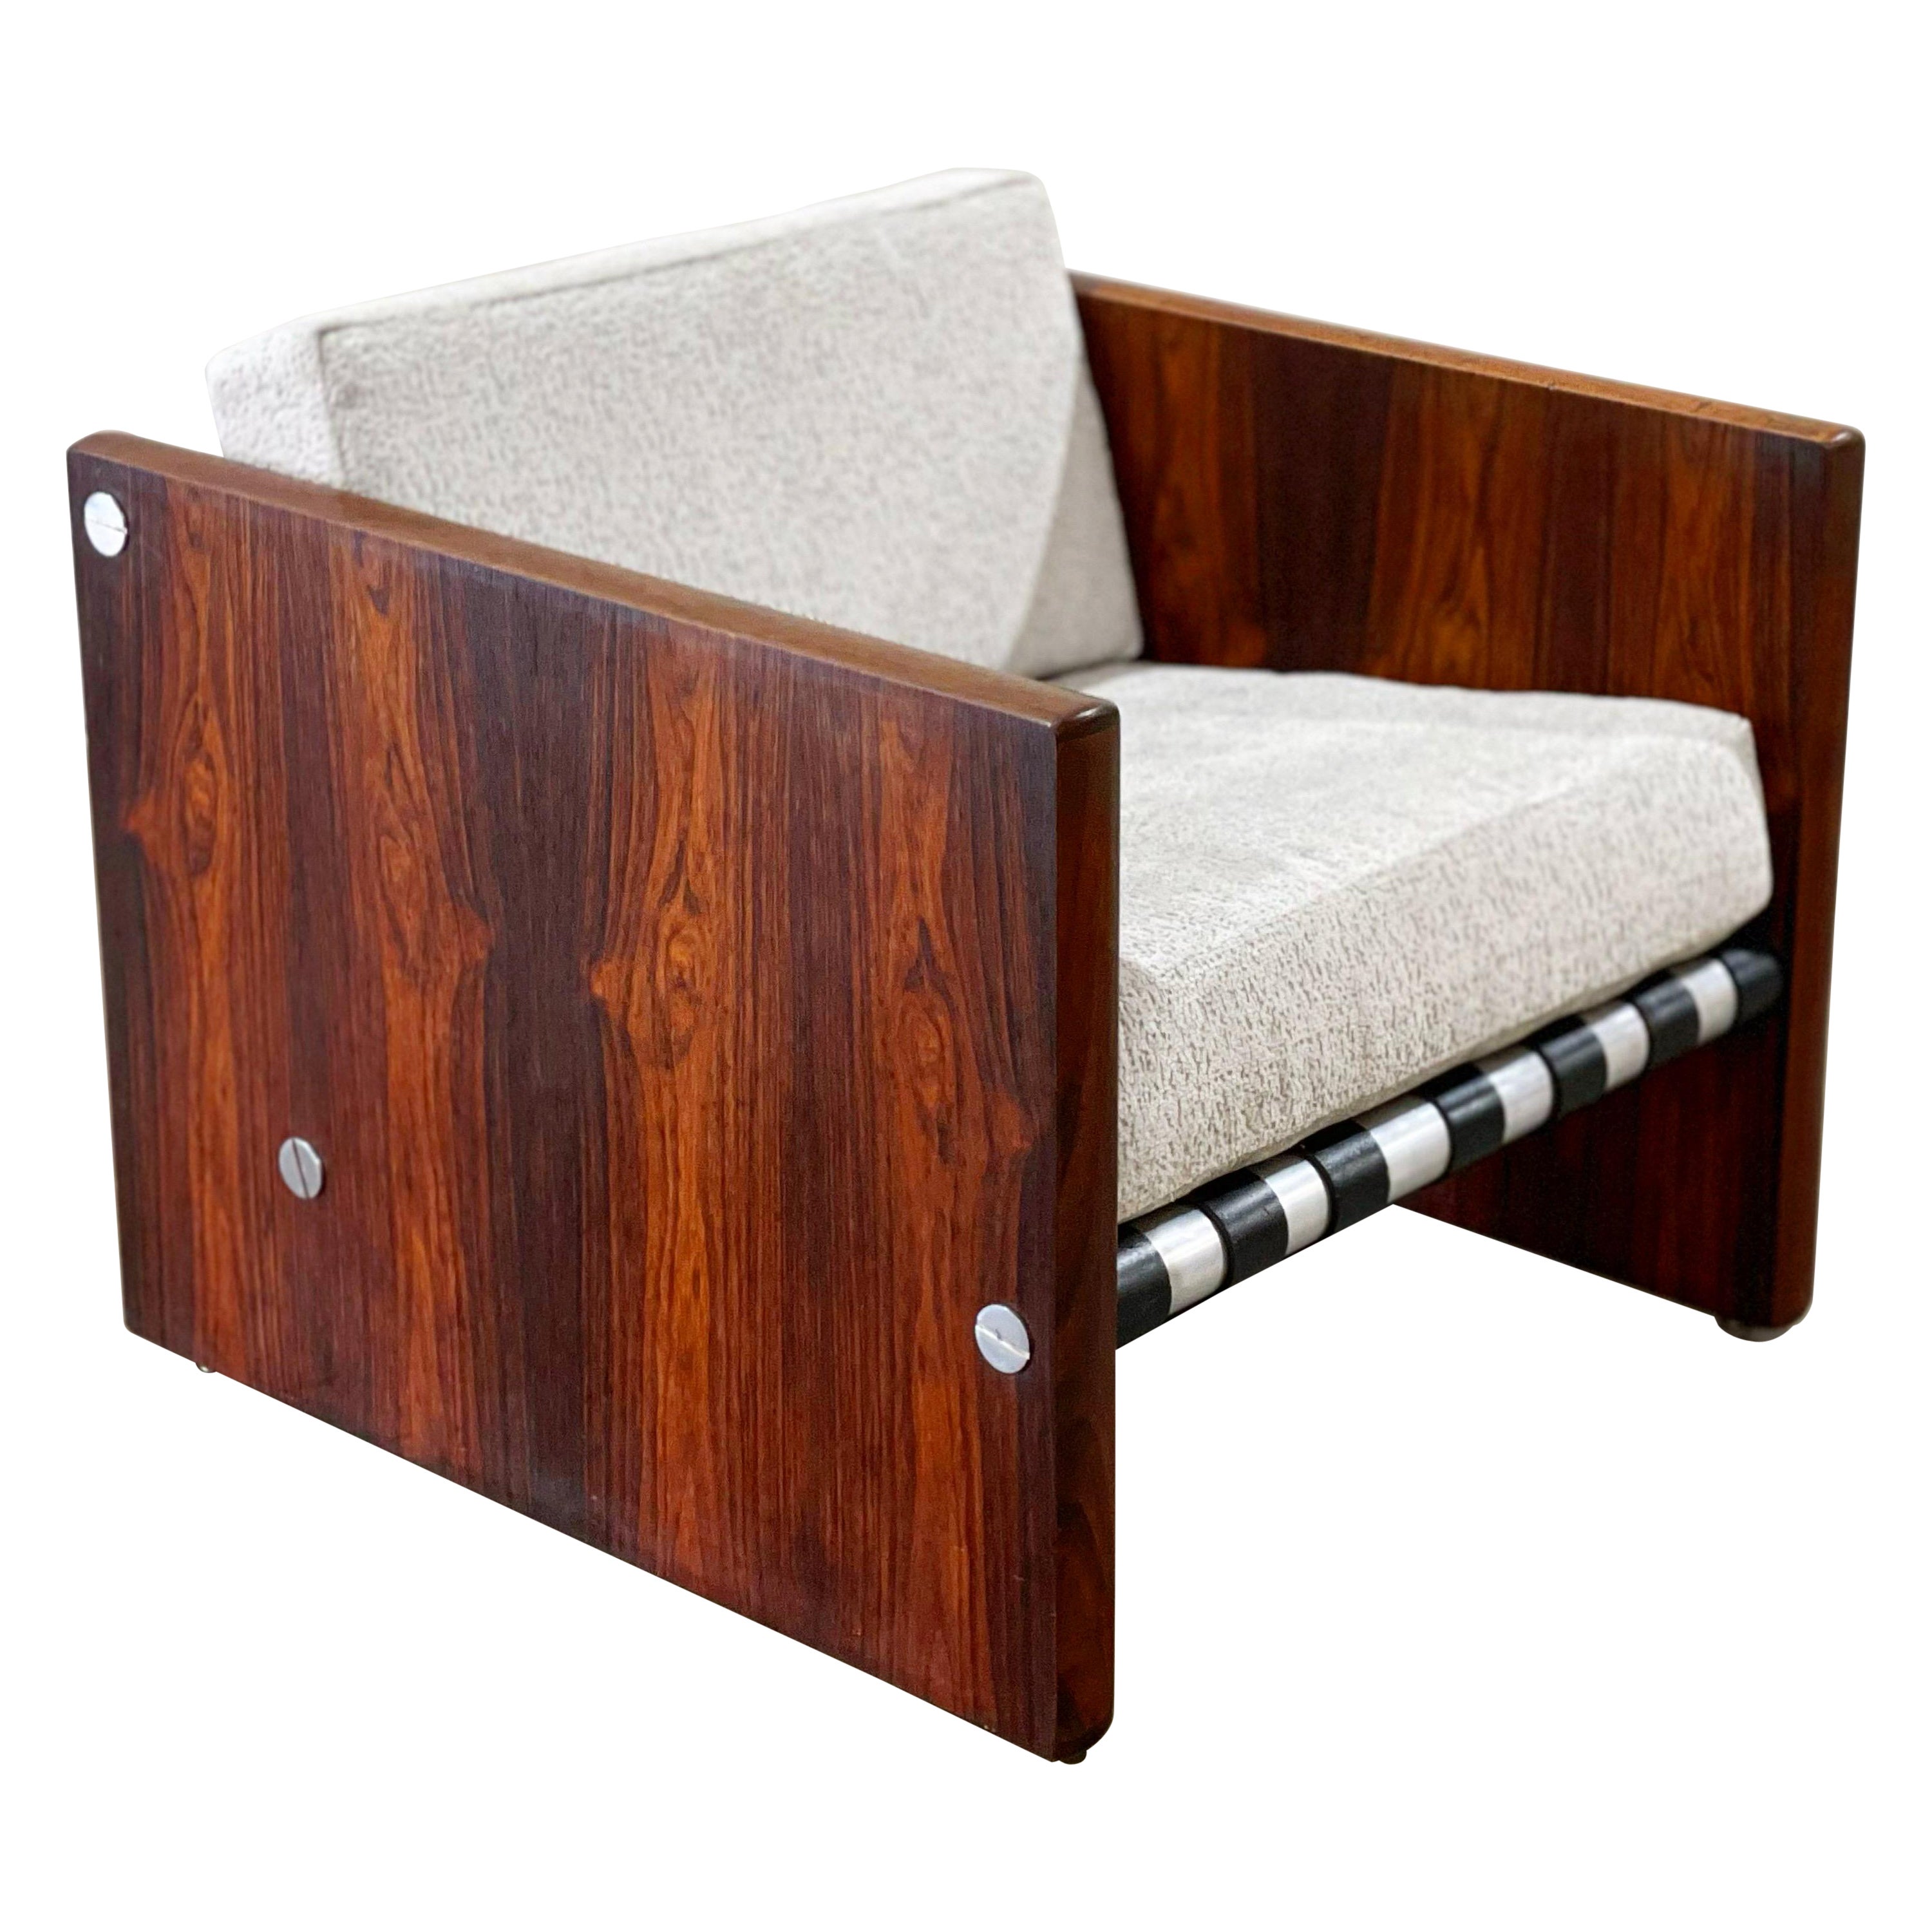 Mid-Century Cube Chair by Jack Cartwright for Founders, Rosewood + Chrome